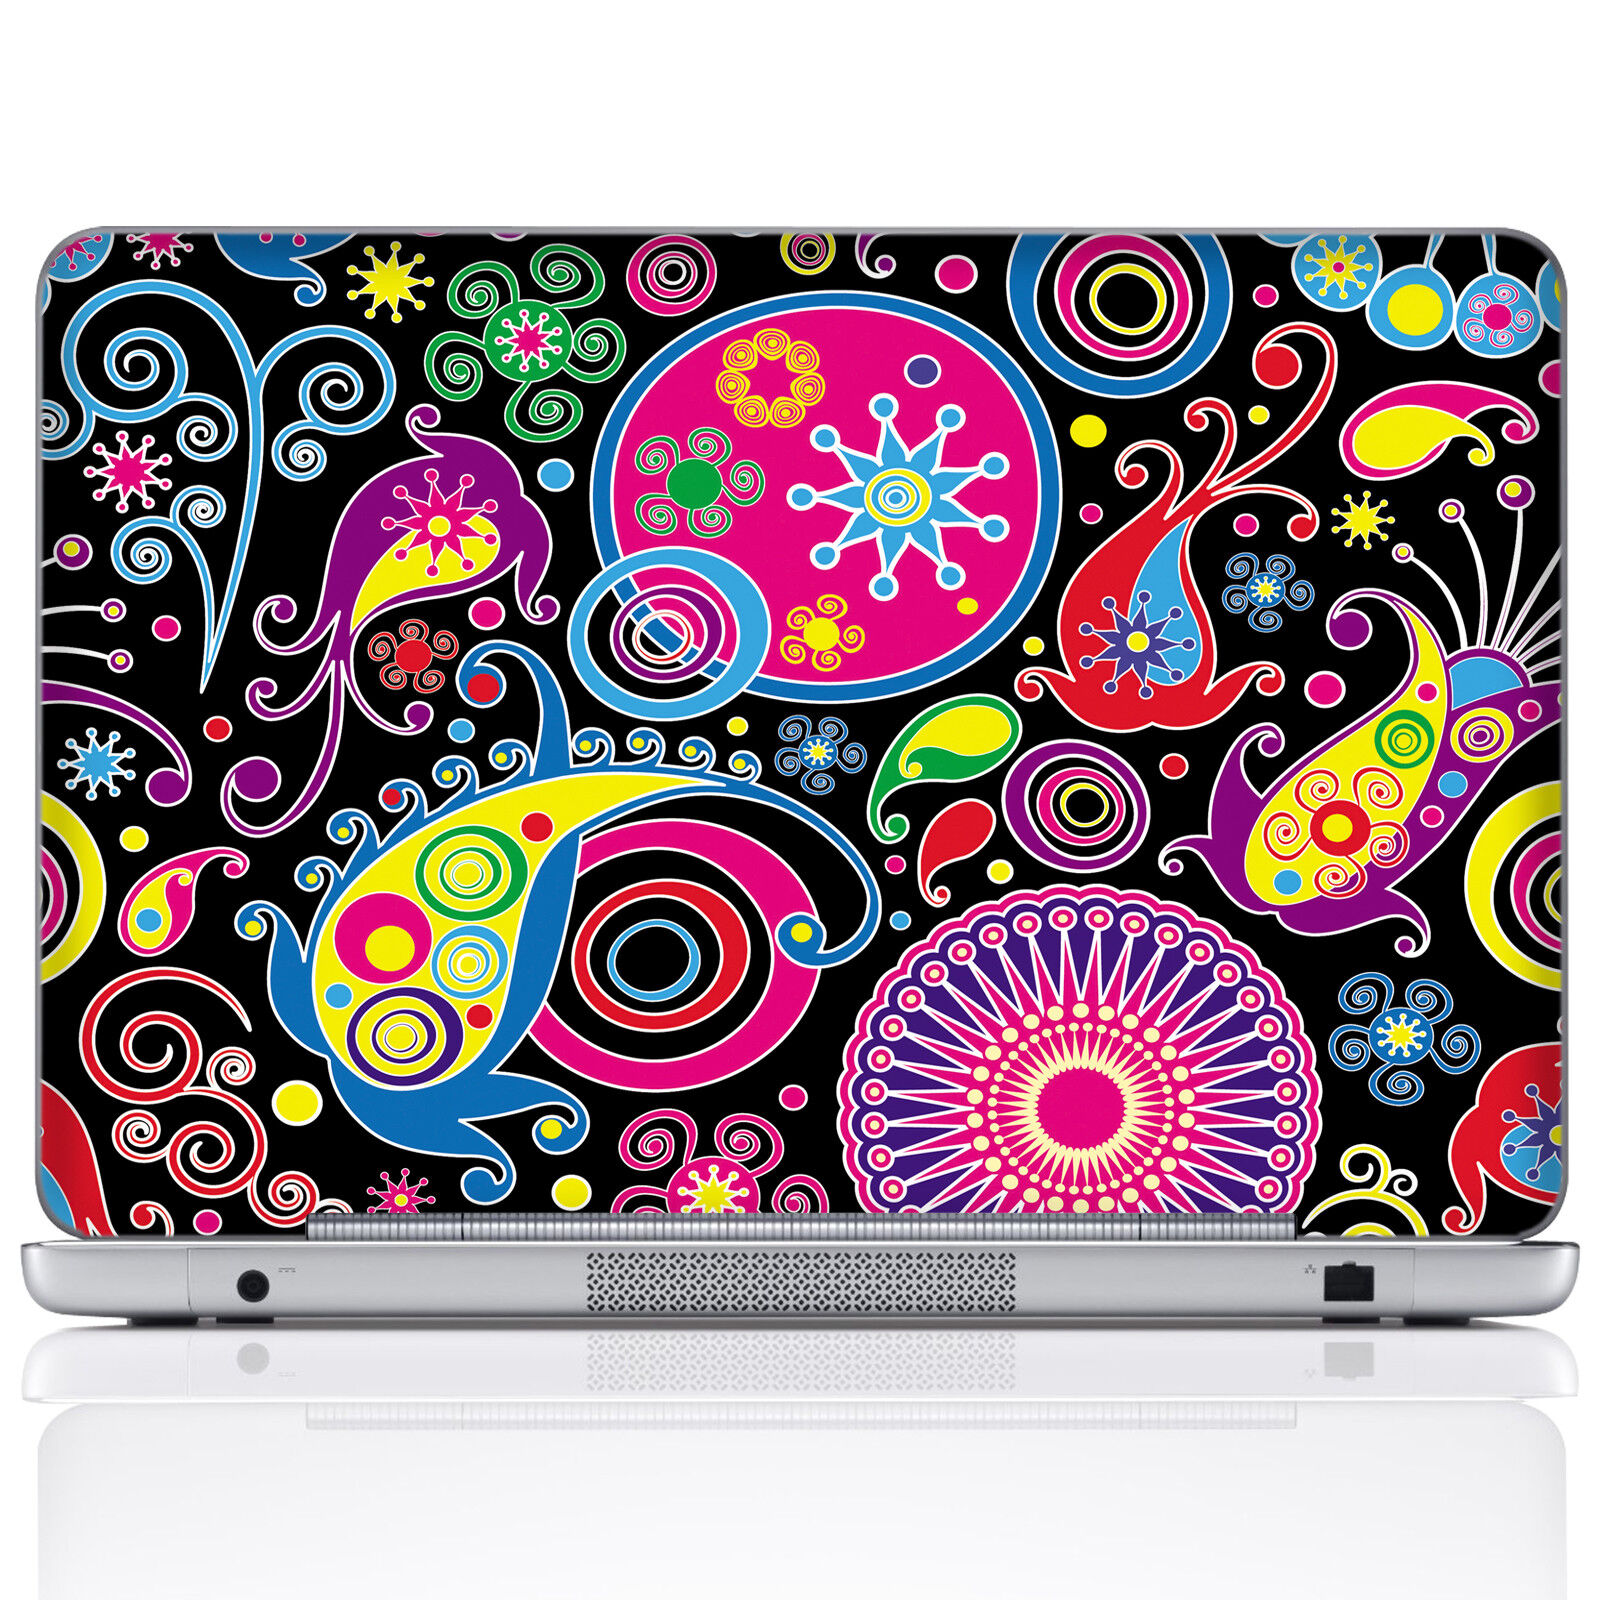 17inch High Quality Laptop Notebook Vinyl Skin Sticker for Asus HP Dell and more